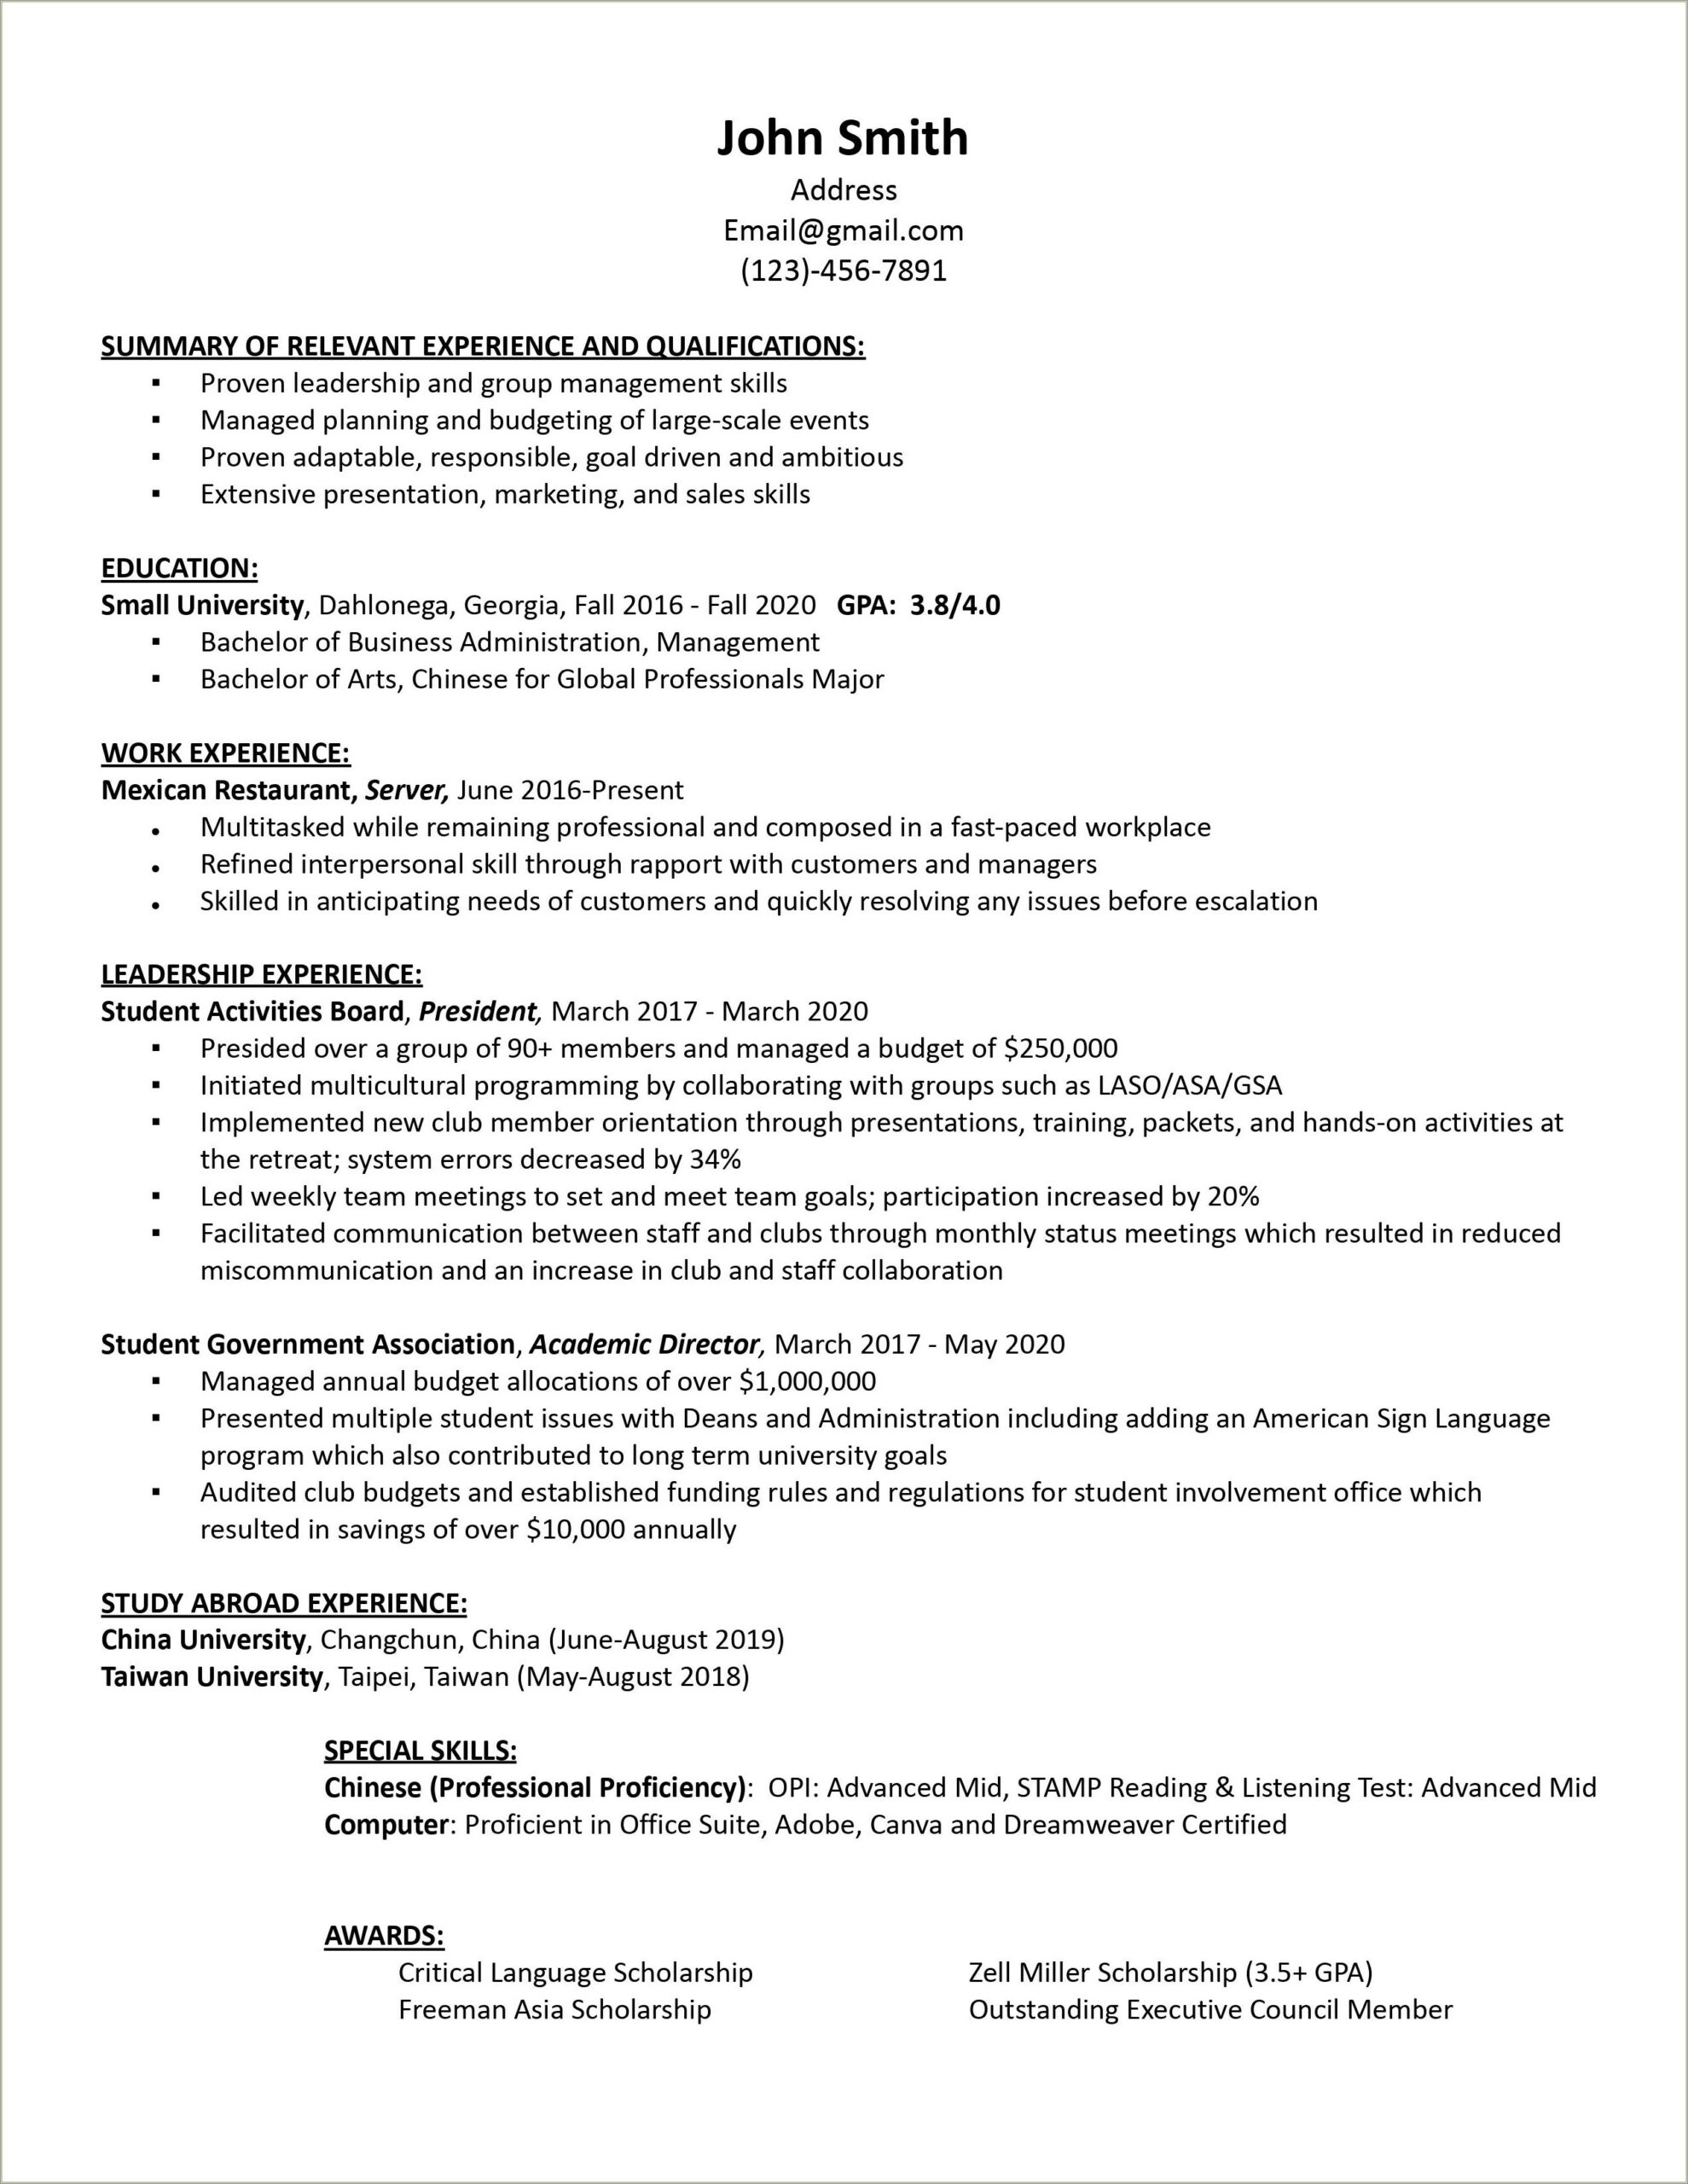 Objective For Entry Level Jobs Resume